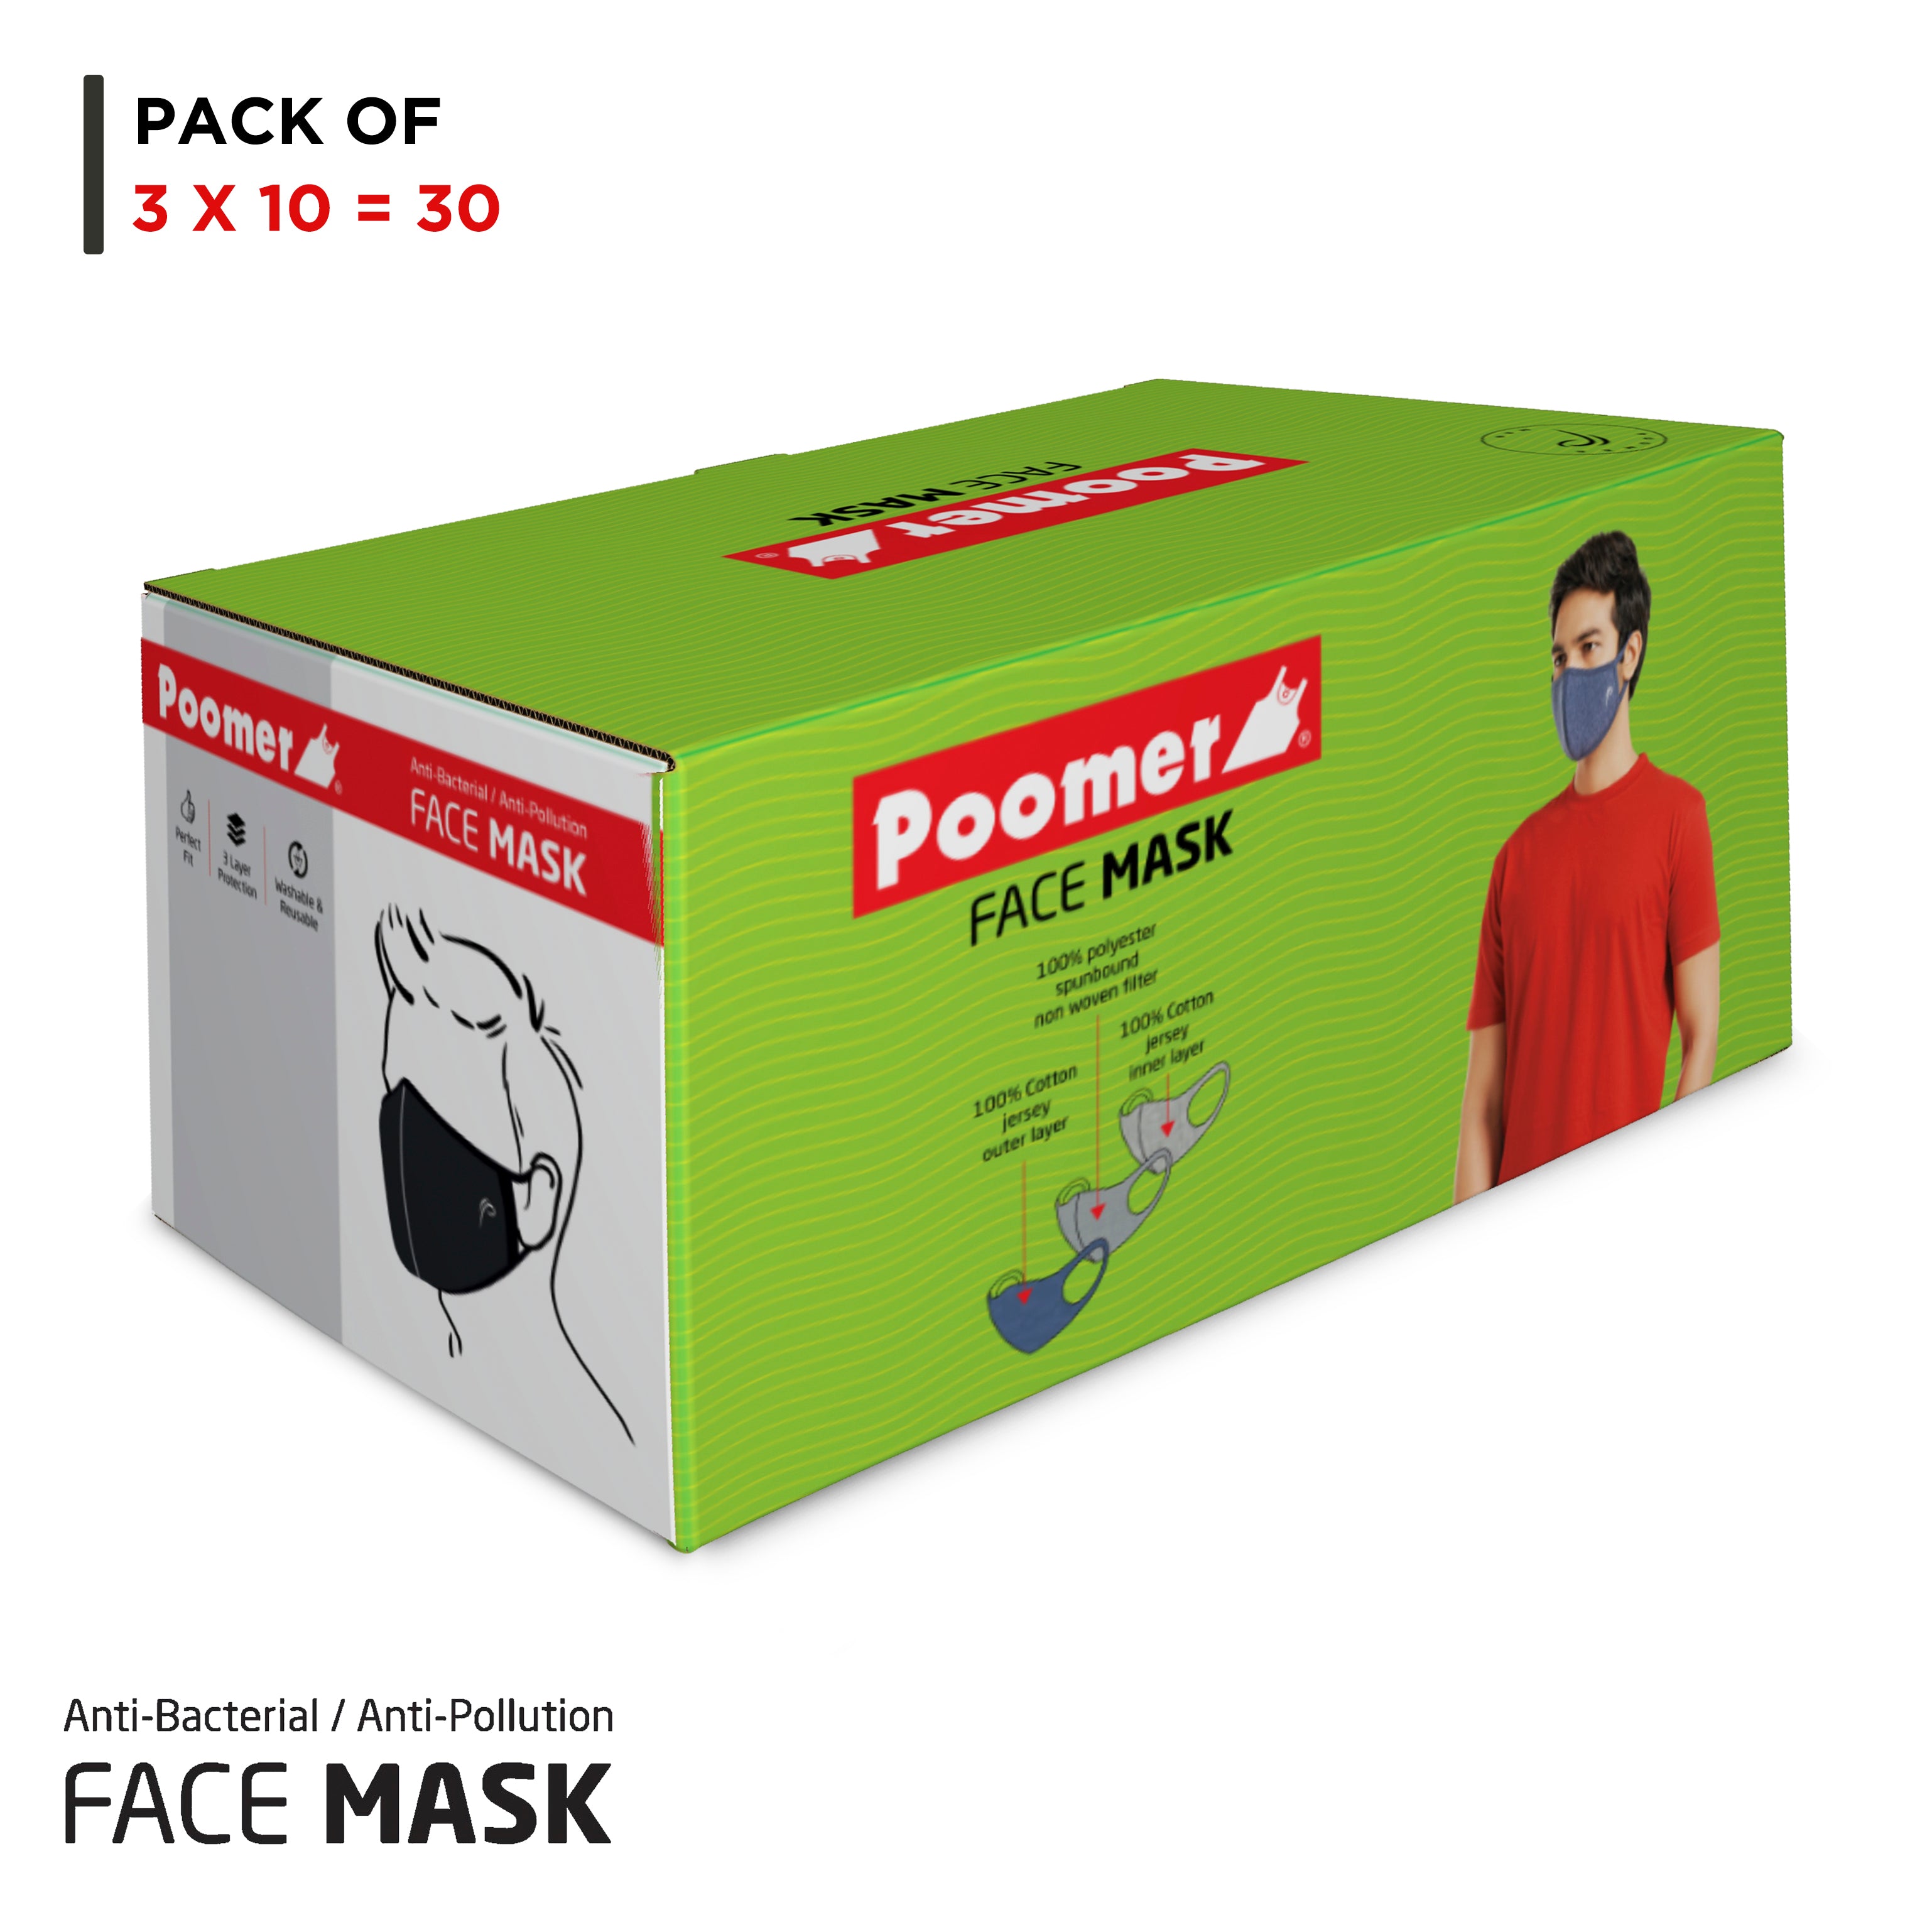 Poomer Face Mask BOX - 3 Layer Anti-Bacterial & Anti-Pollution Face Mask (Pack of 30) - Premium / Lite